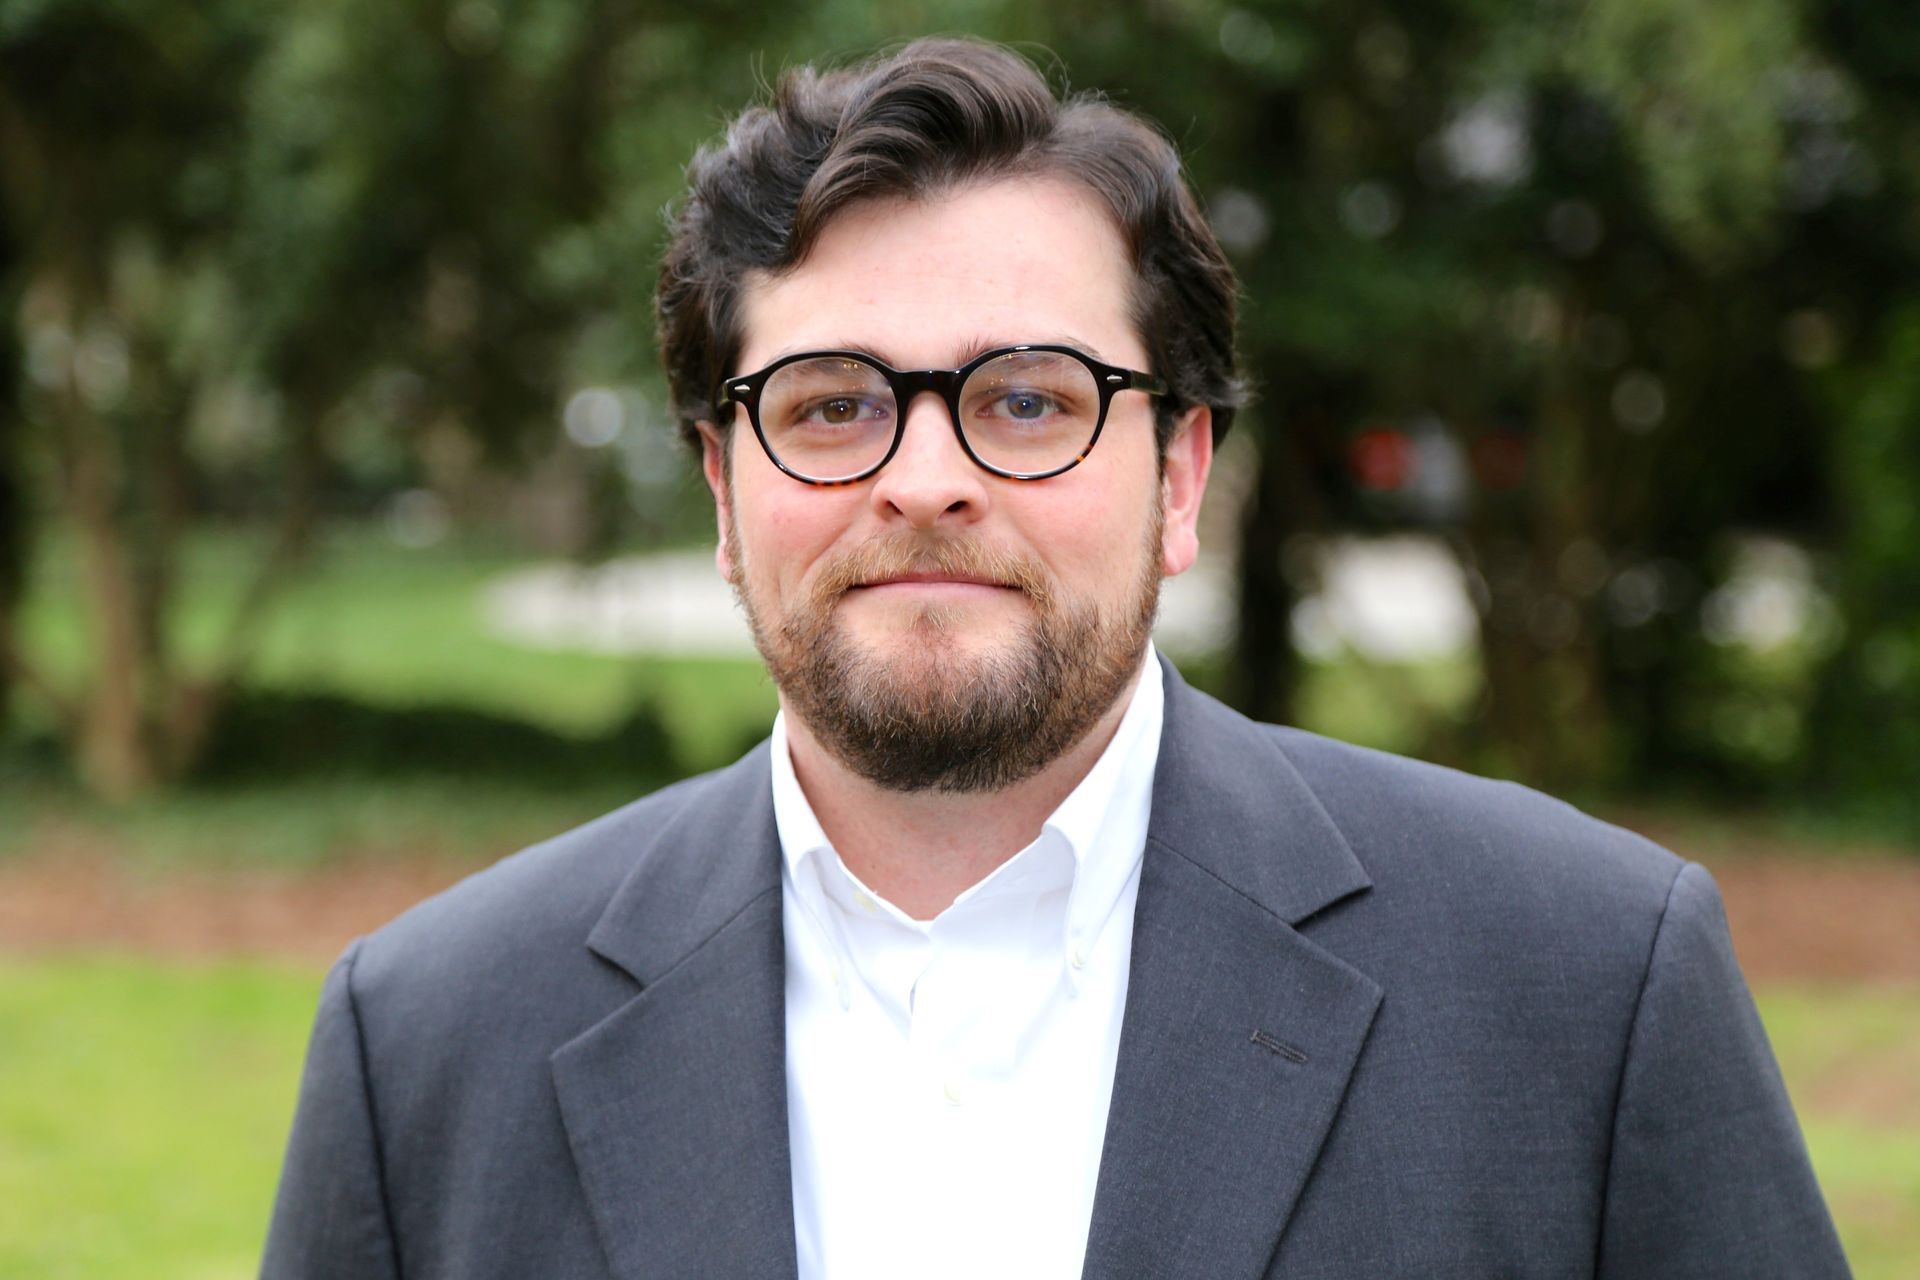 A man with a beard and glasses is wearing a suit and a white shirt.